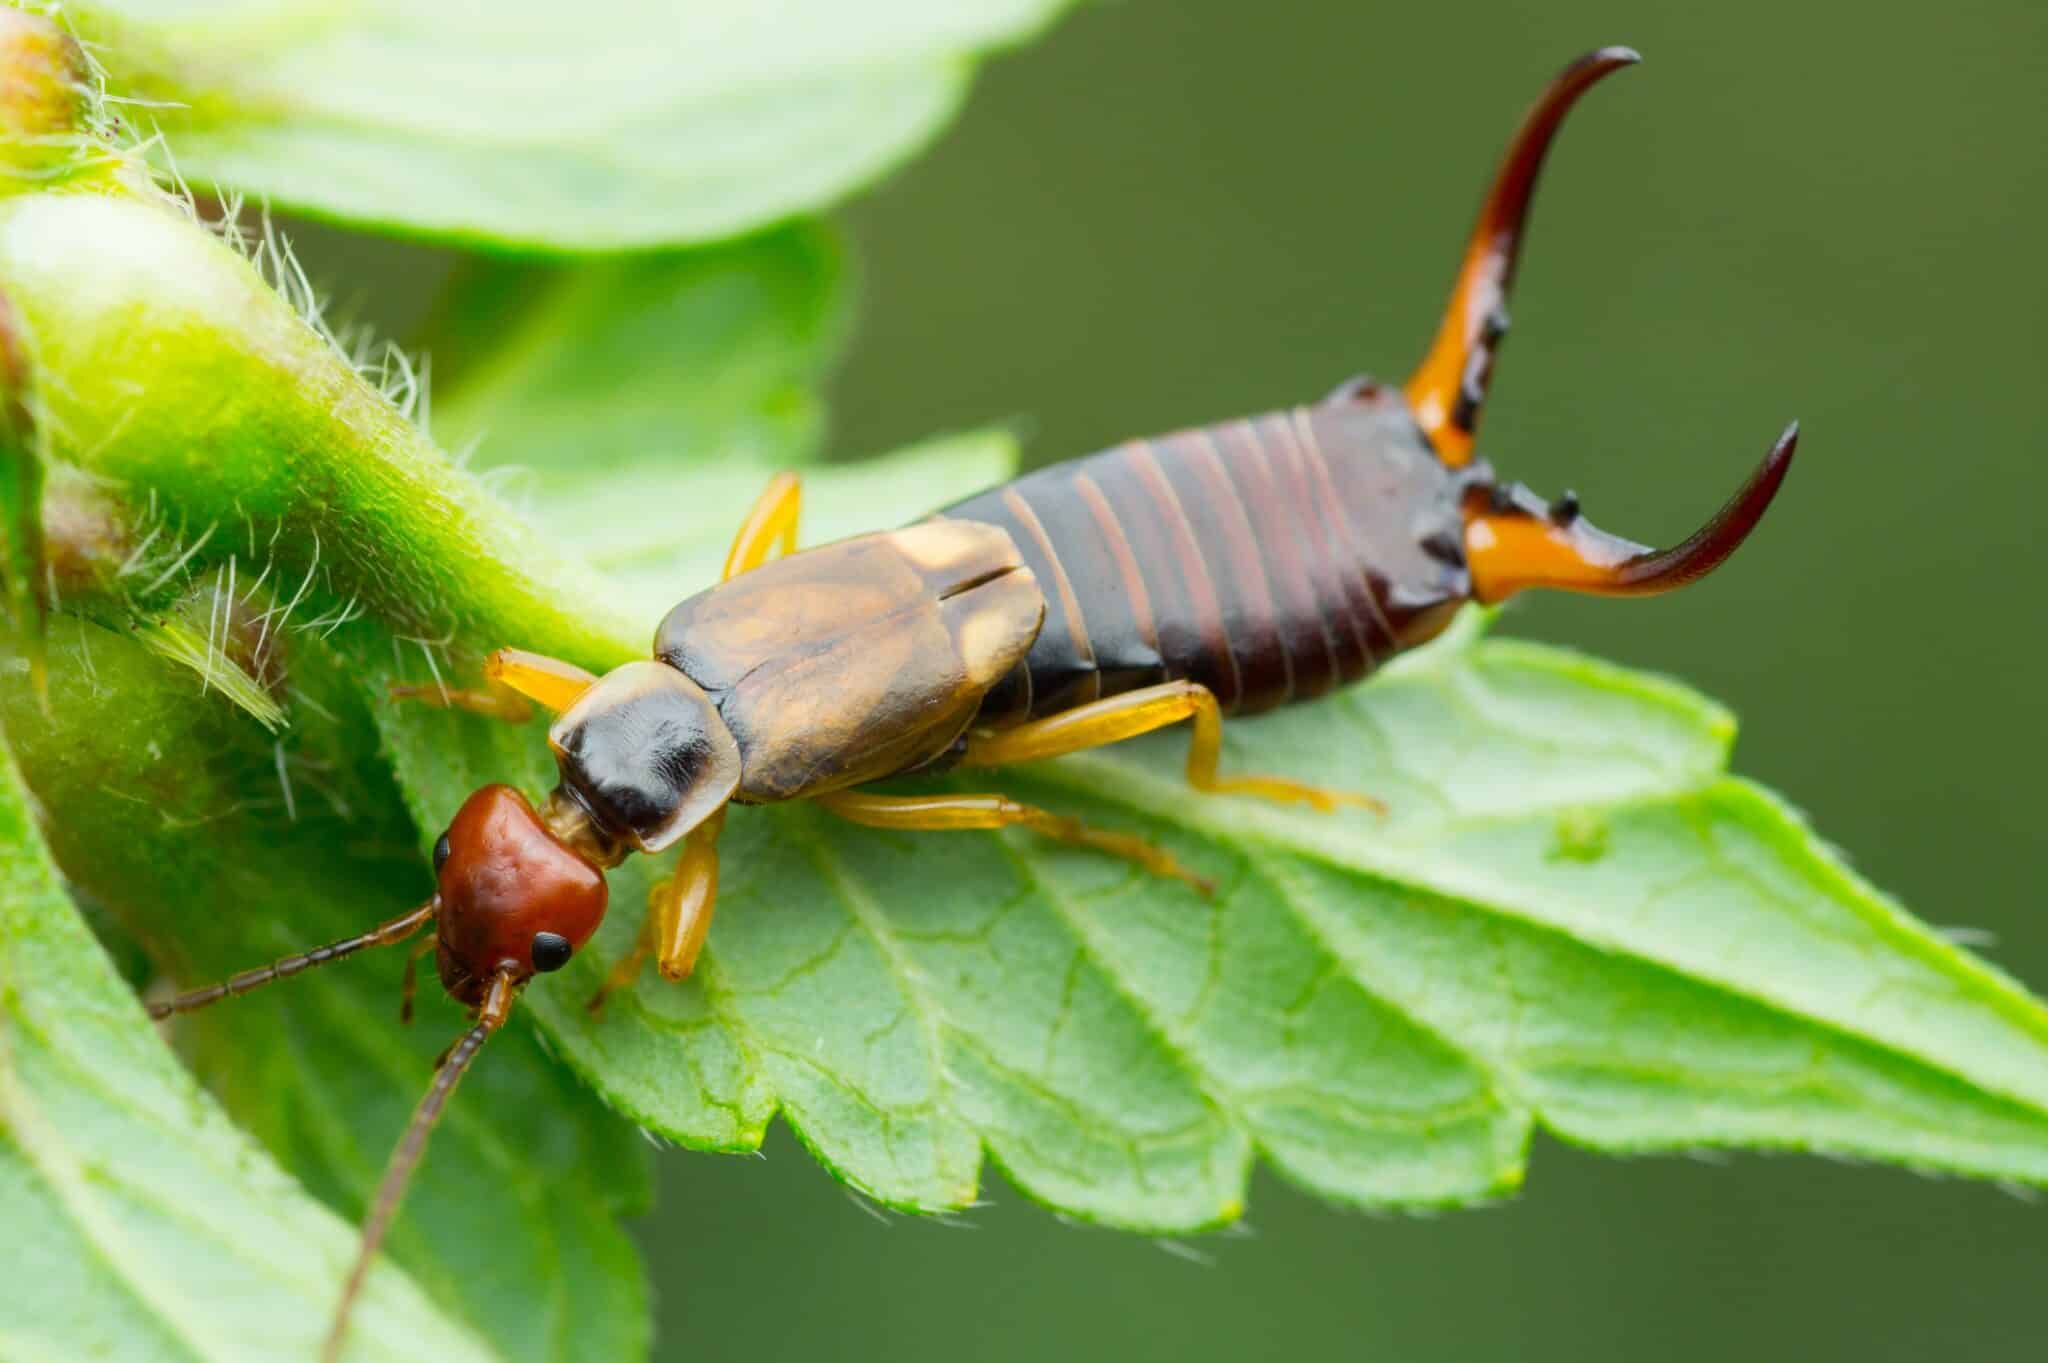 close up of an earwig on a leaf